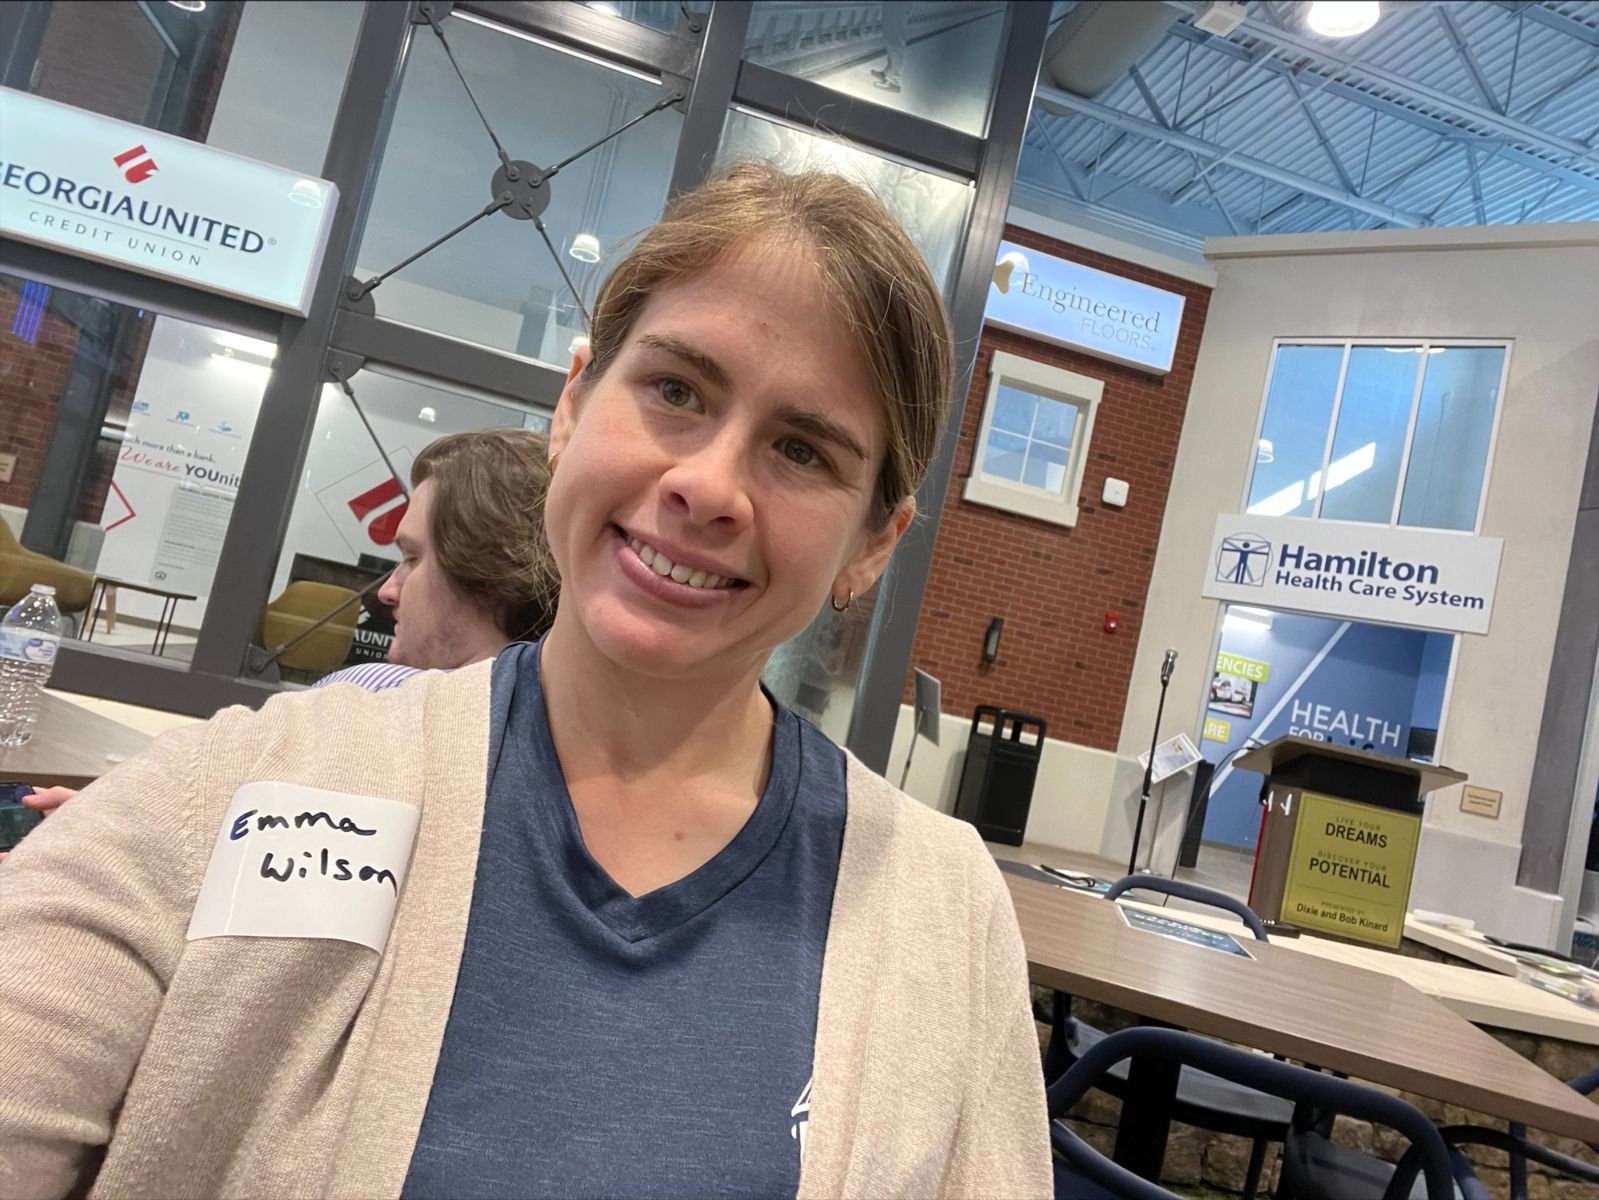 WSOB volunteer Emma Wilson taking a selfie in the JA Discover Center with a few of the simulator stores behind her, a GUCU bank and a Hamilton Health Care System building.